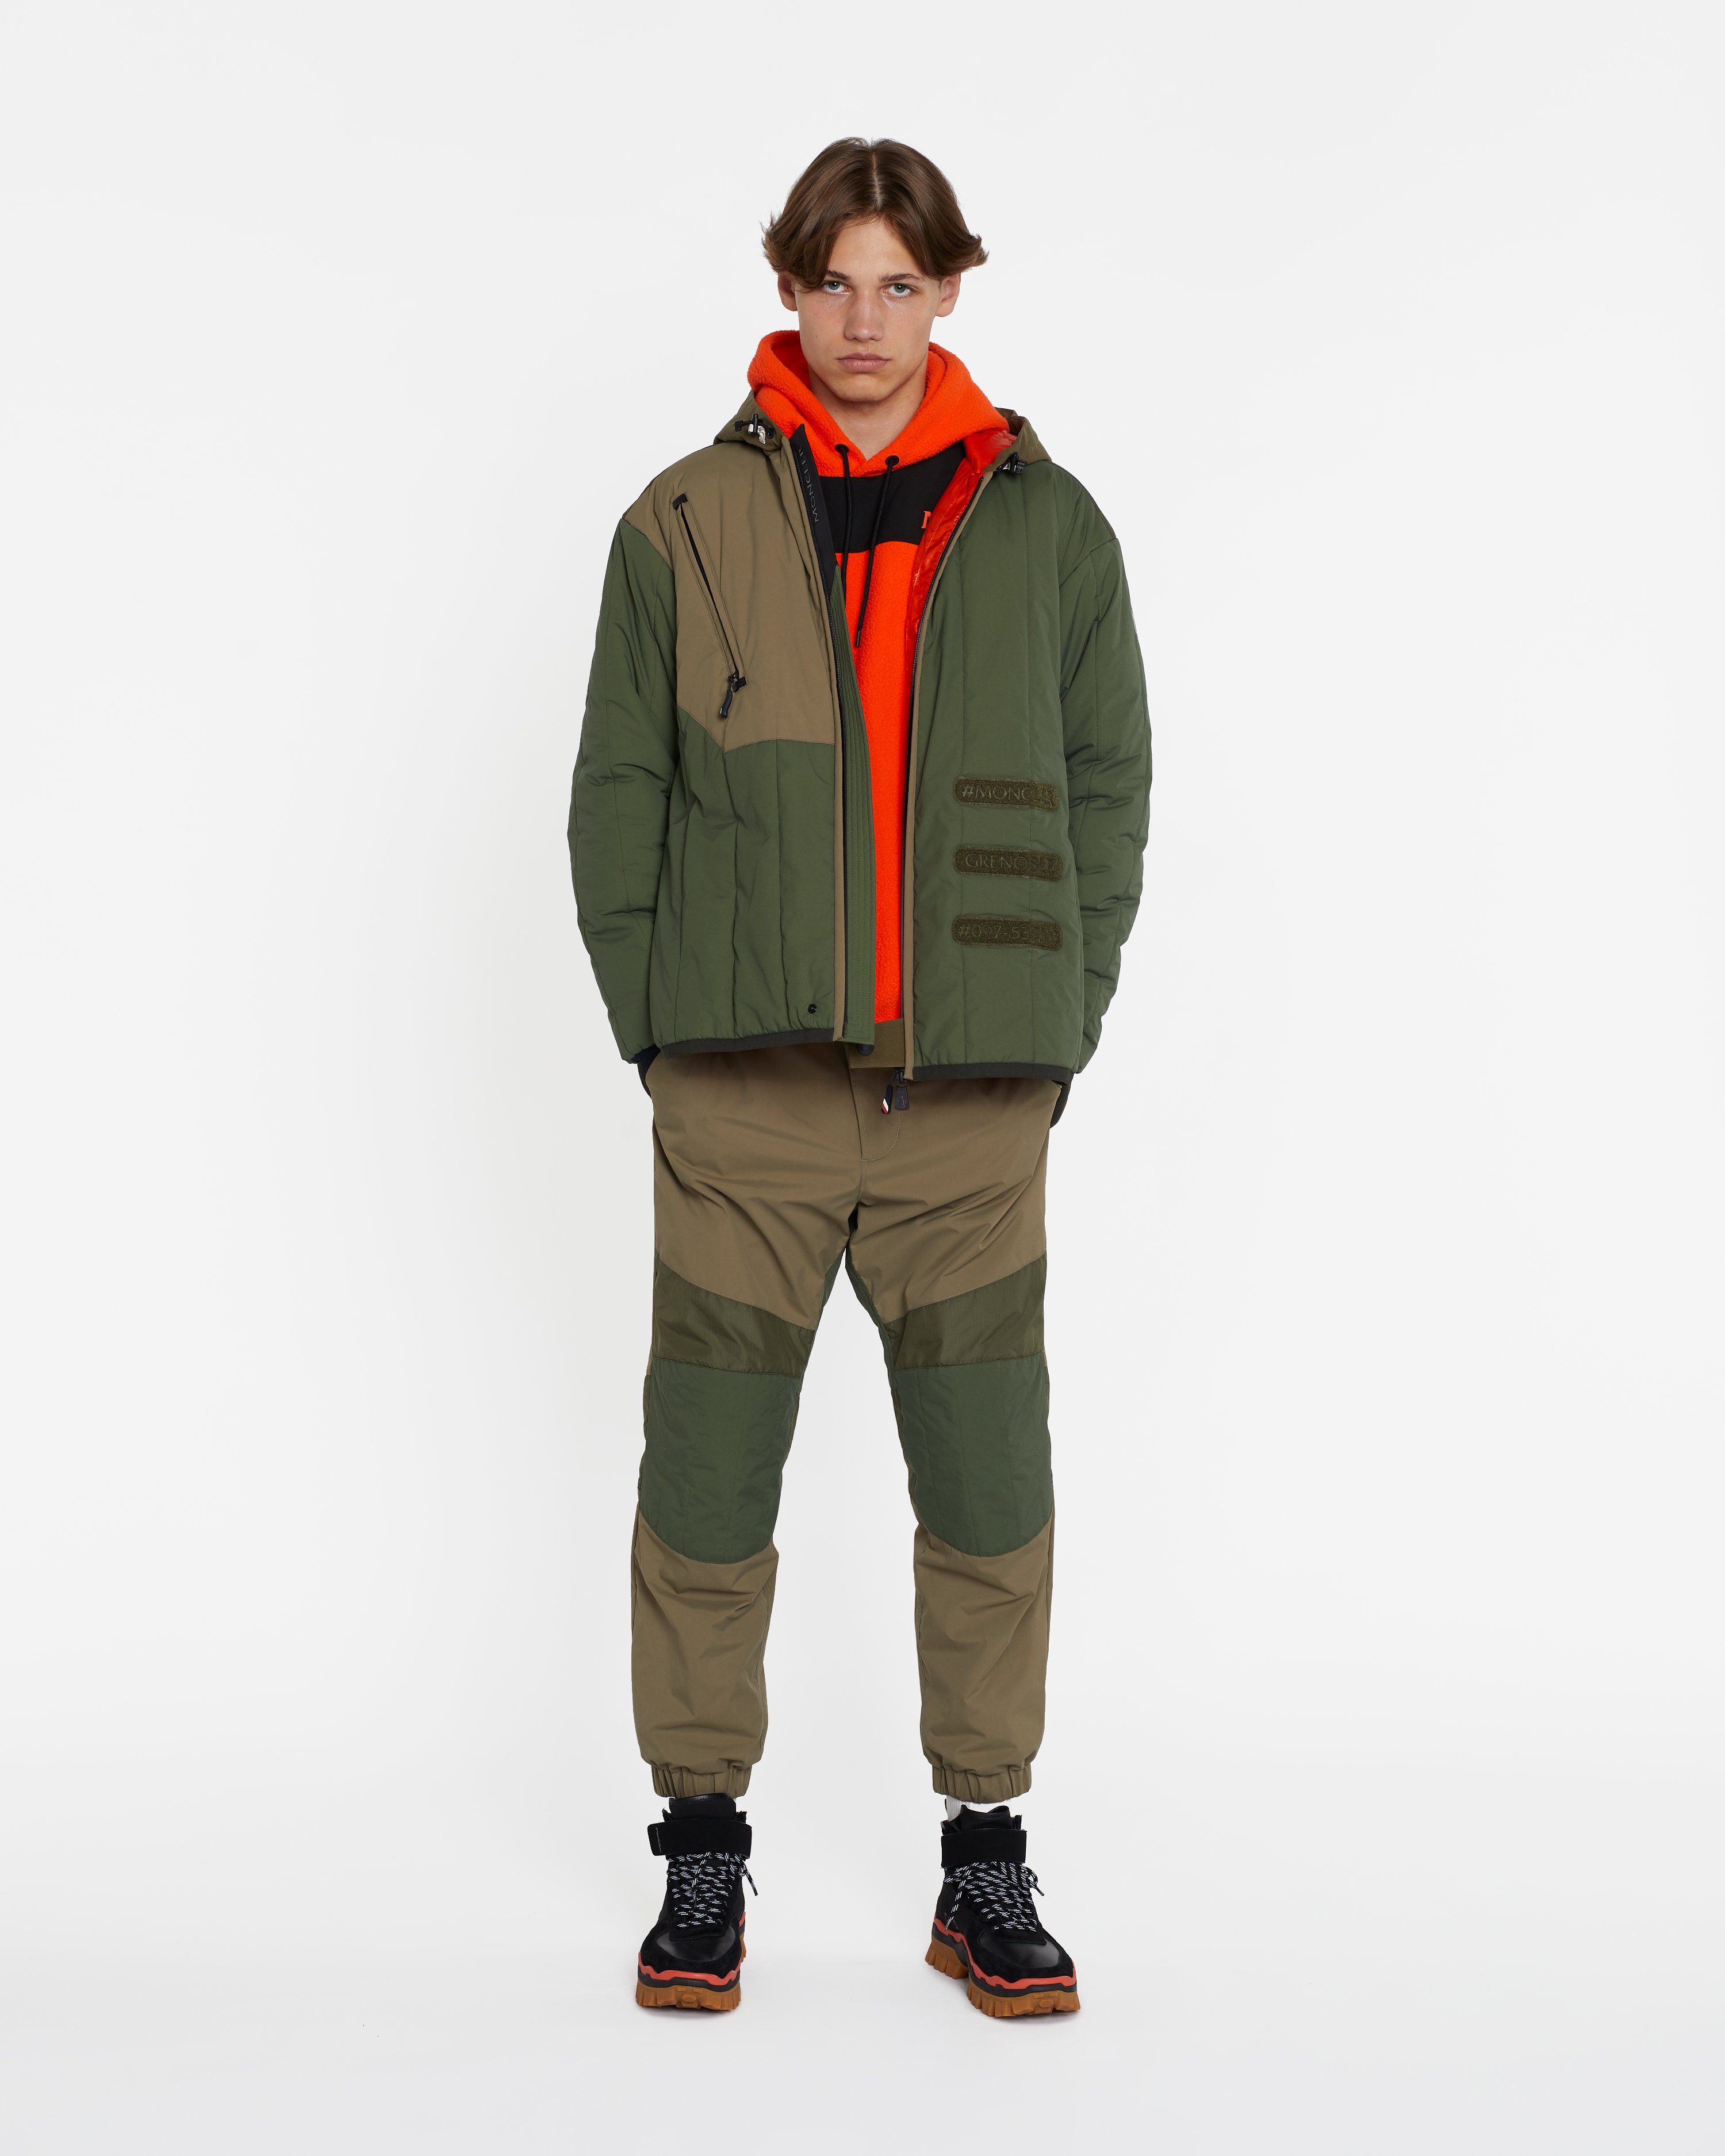 Moncler Genius - Recycled Indren Jacket - Clothing - Green - Image 4